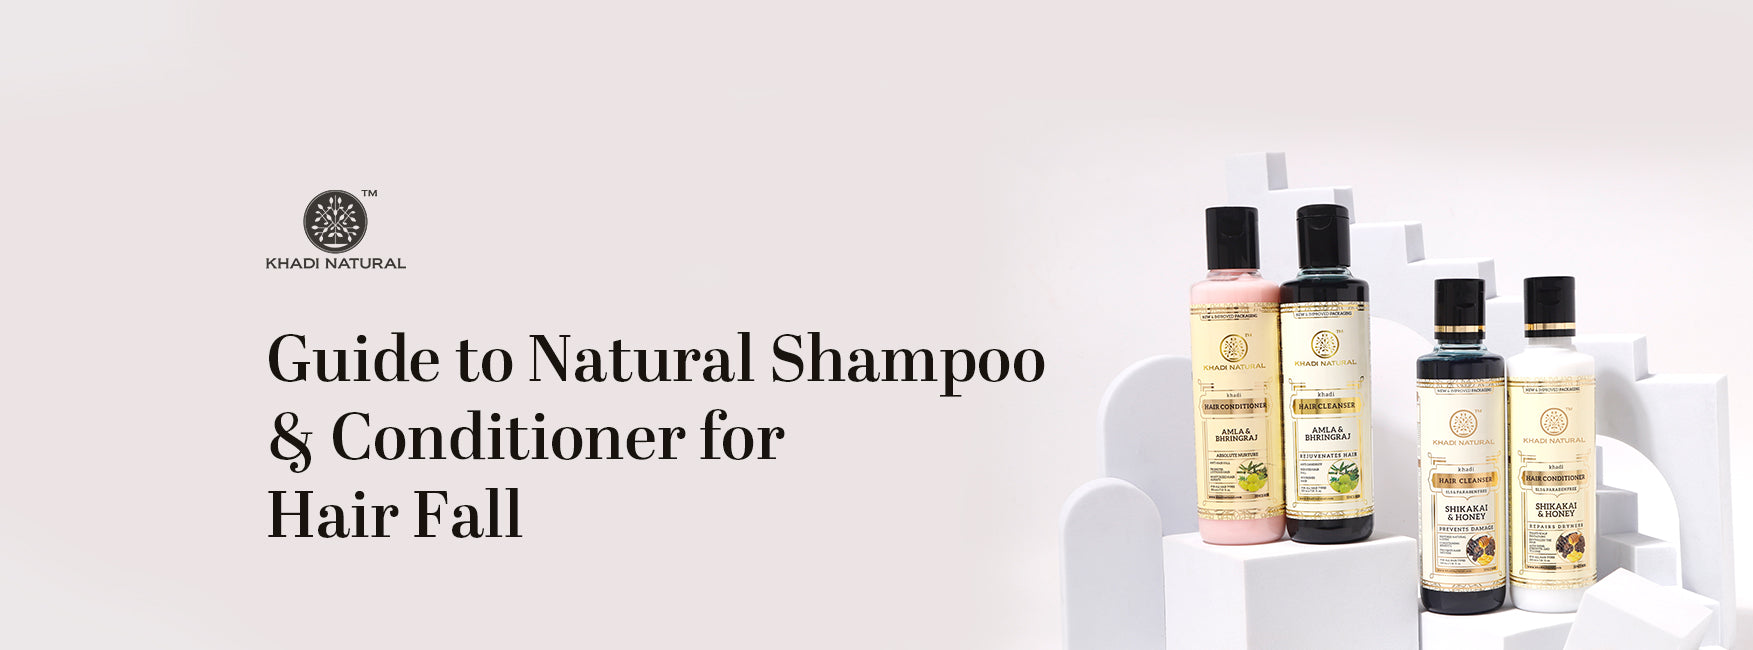 Natural Shampoo and Conditioner Guide for Hair Fall